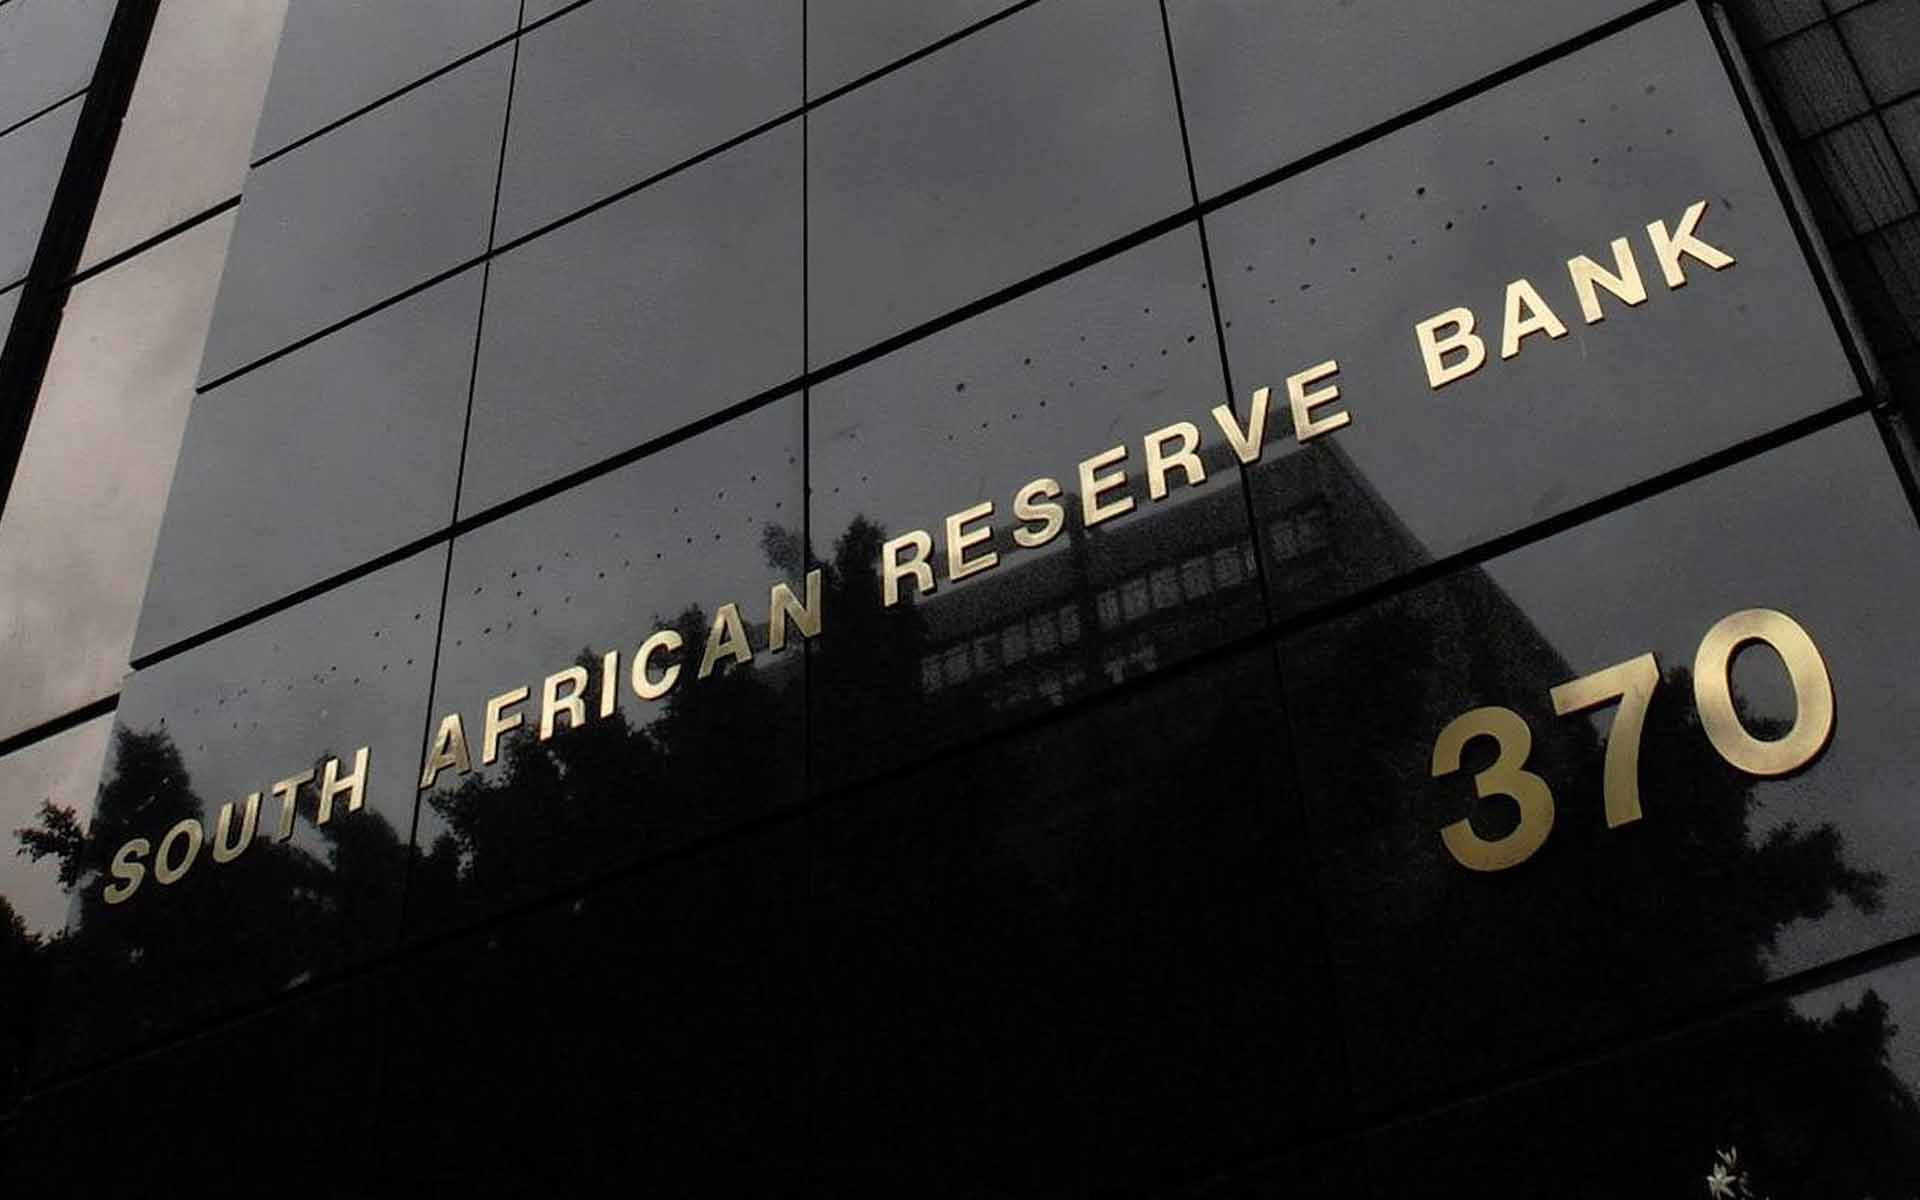 These 5 African central banks are expected to keep benchmark interest rates on hold, amid economic turmoil